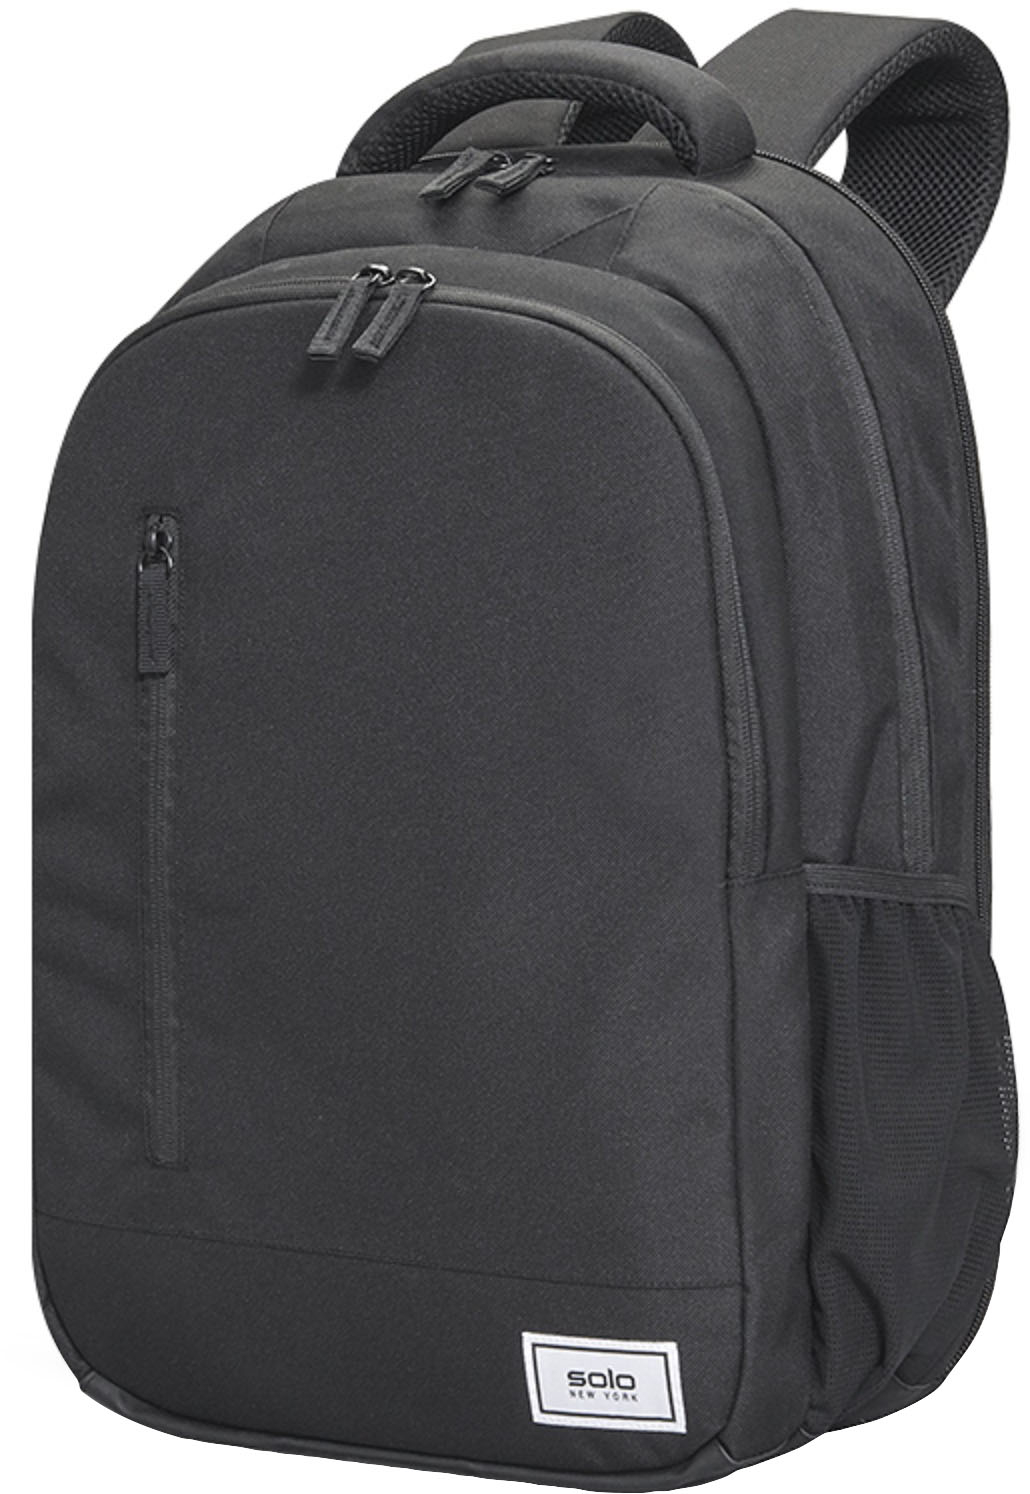 Left View: Swissdigital Design - Circuit TSA-firendly Backpack with USB Charging port/RFID protection and fits up to 15.6" laptop - Black